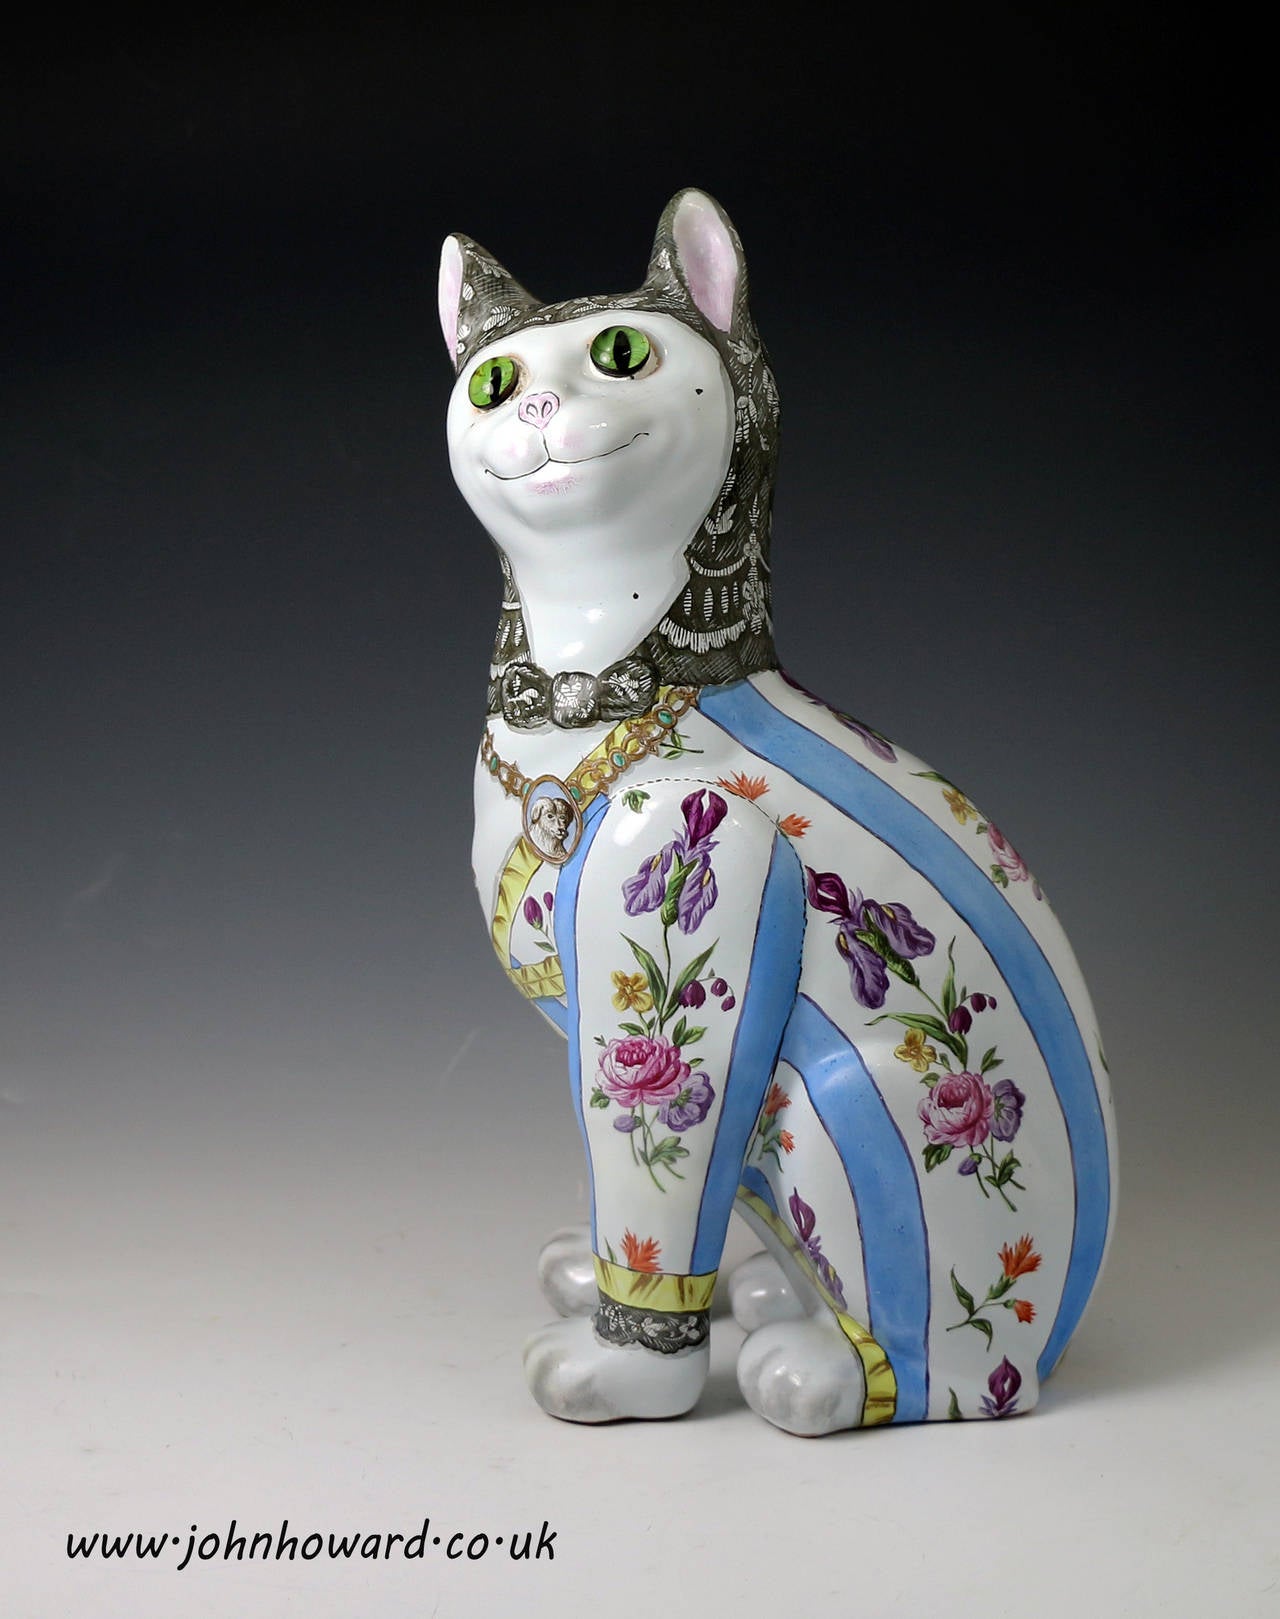 Antique pottery figure of a seated green eyed cat wearing a blue striped and floral outfit ( the glass eyes are very realistic). This figure is an original piece and signed E Galle Nancy.The figure captures the whimsical character of the feline, the